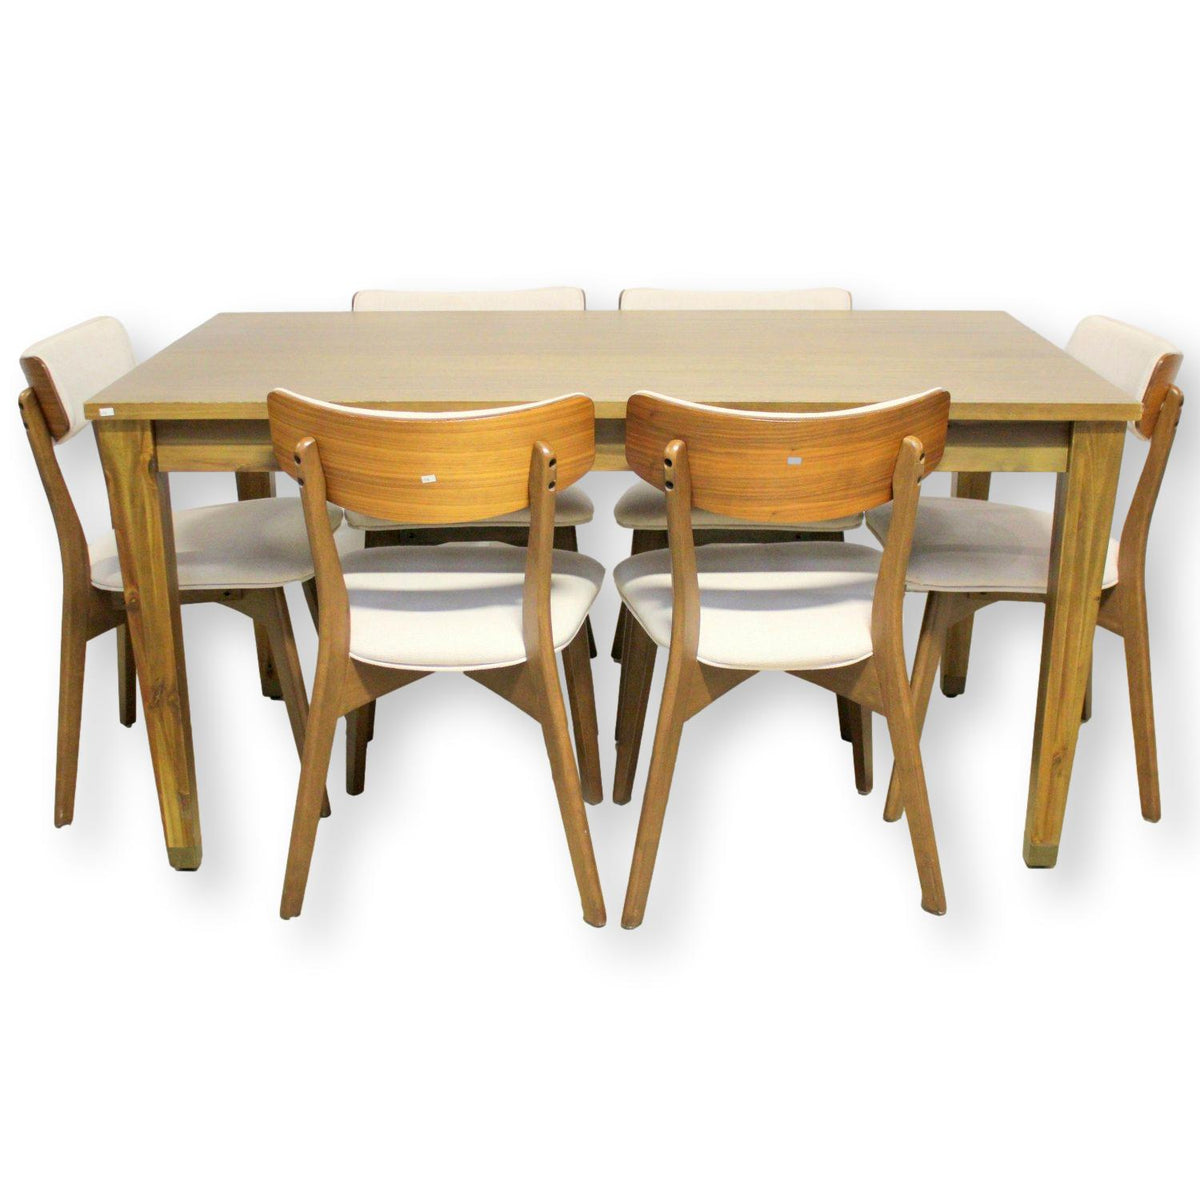 World Market Dining Table w/6 Chairs